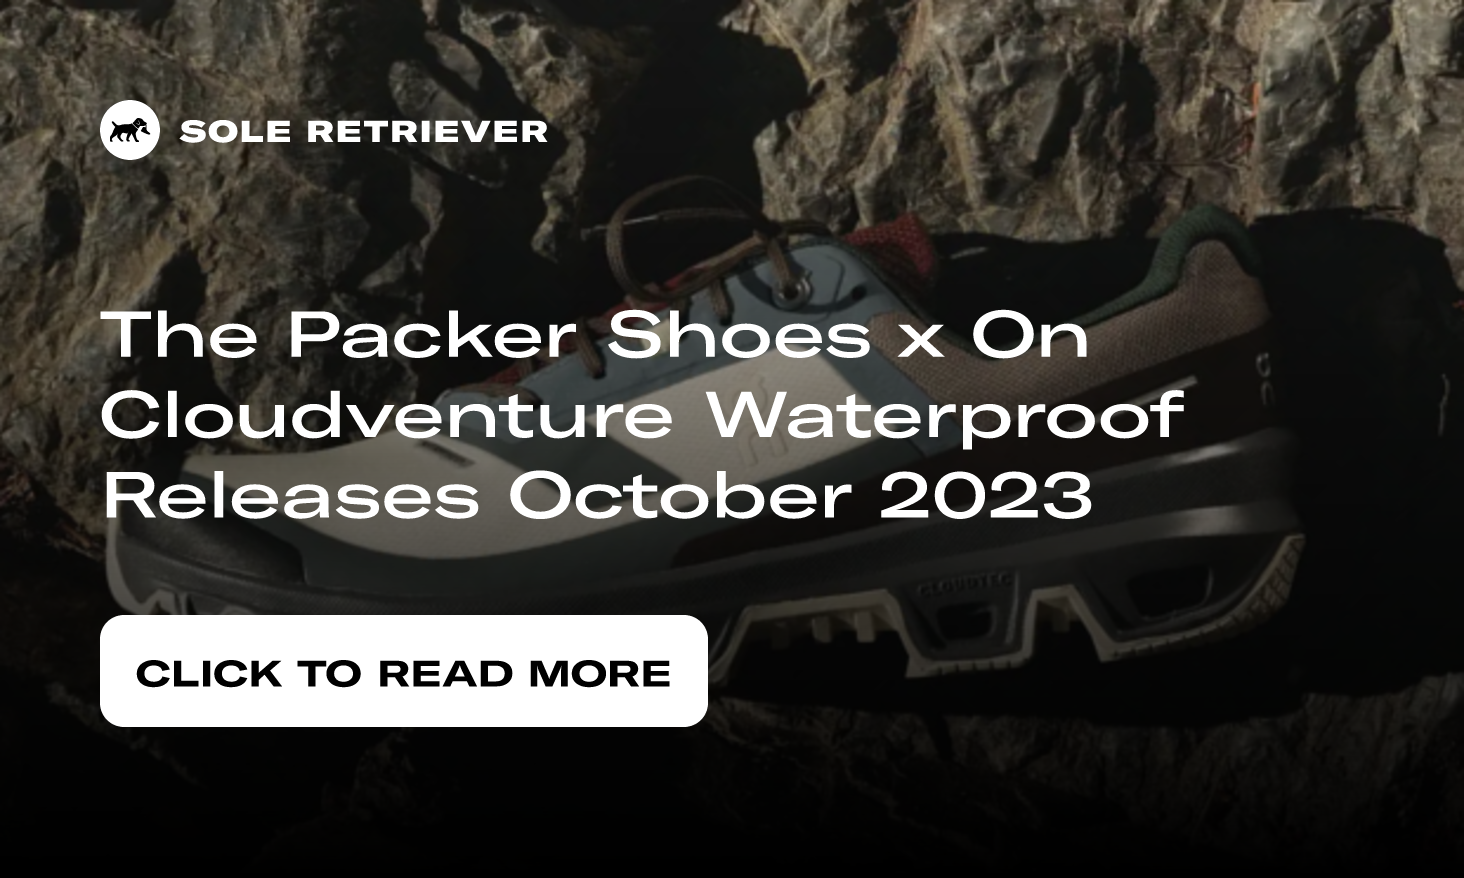 The Packer Shoes x On Cloudventure Waterproof Releases October